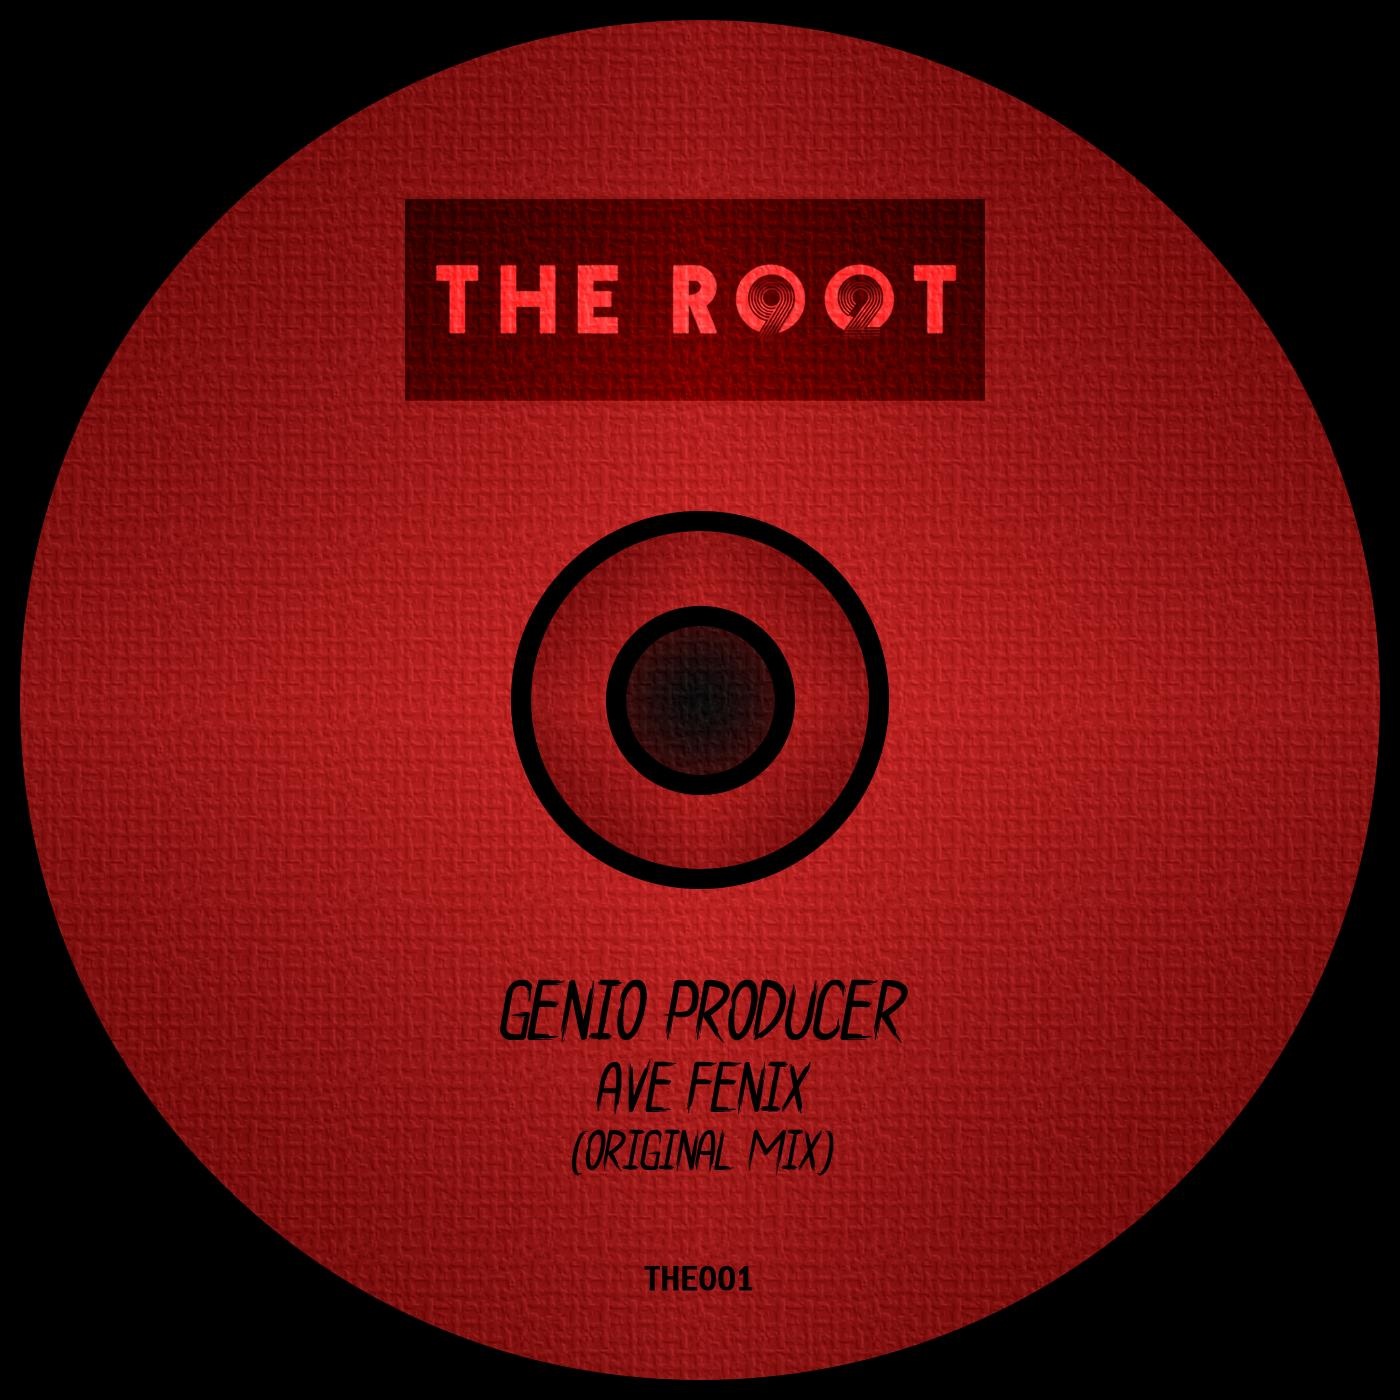 Genio Producer - Ave Fenix / The Root 92